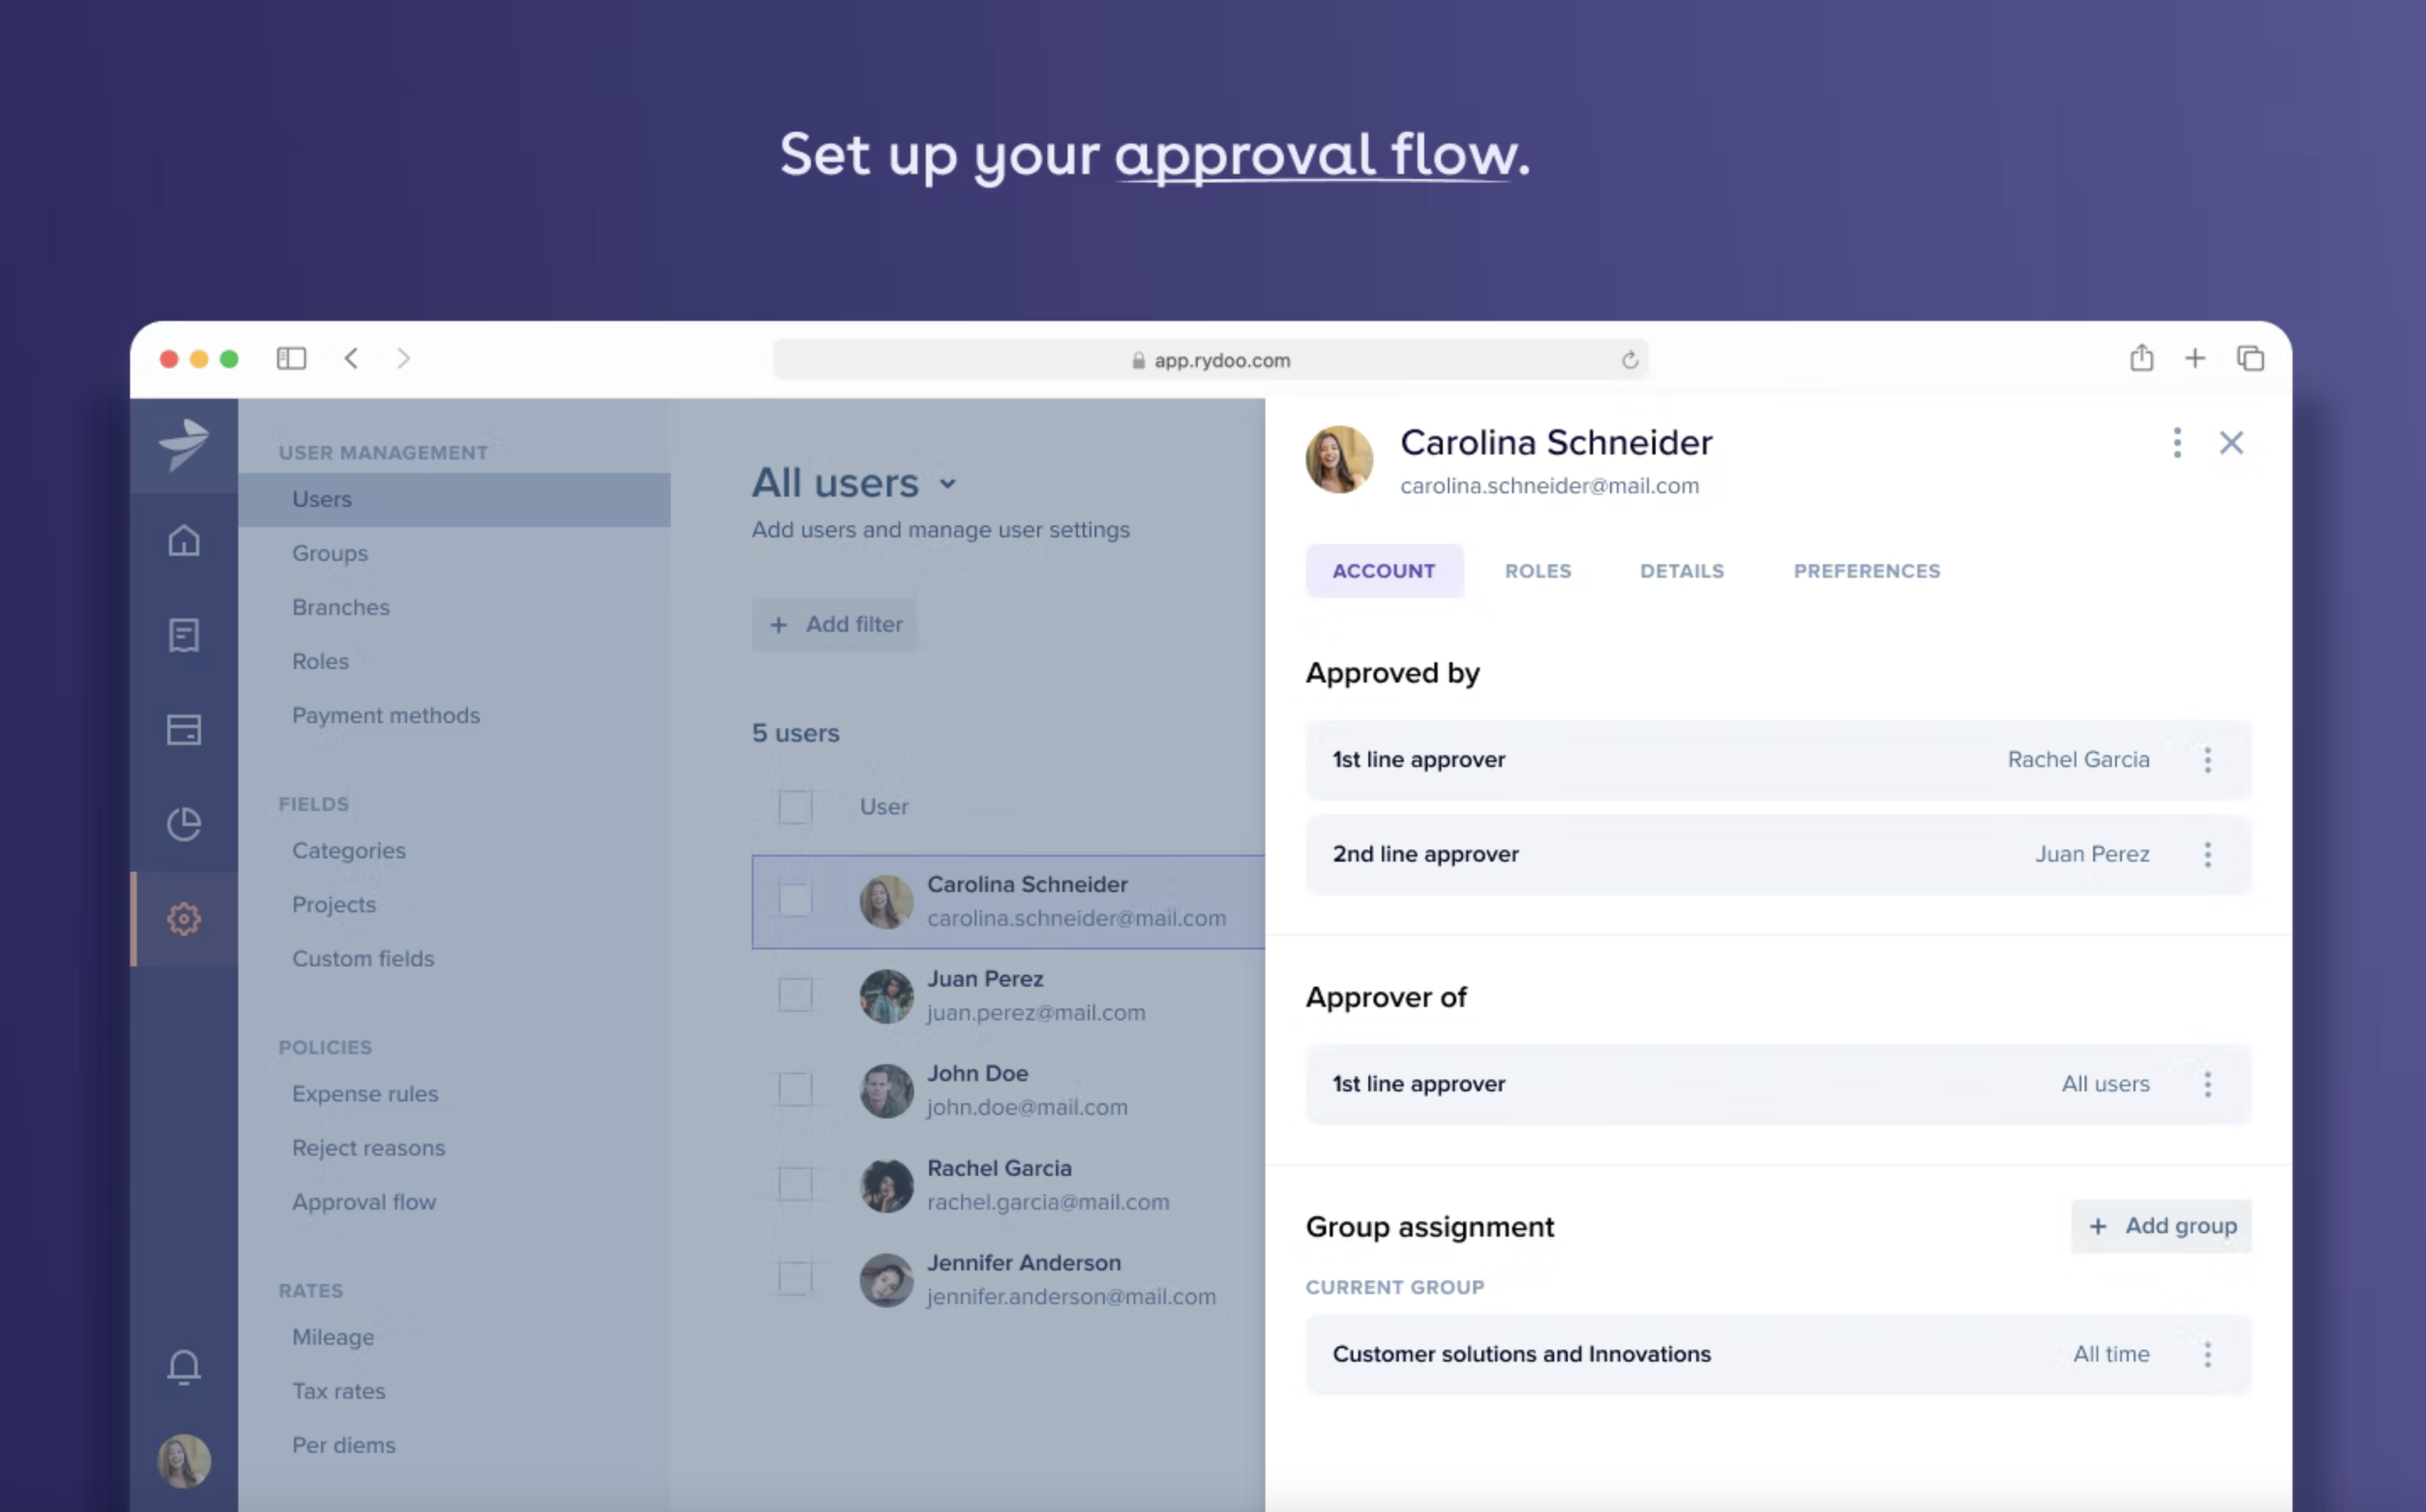 Set up your approval flow